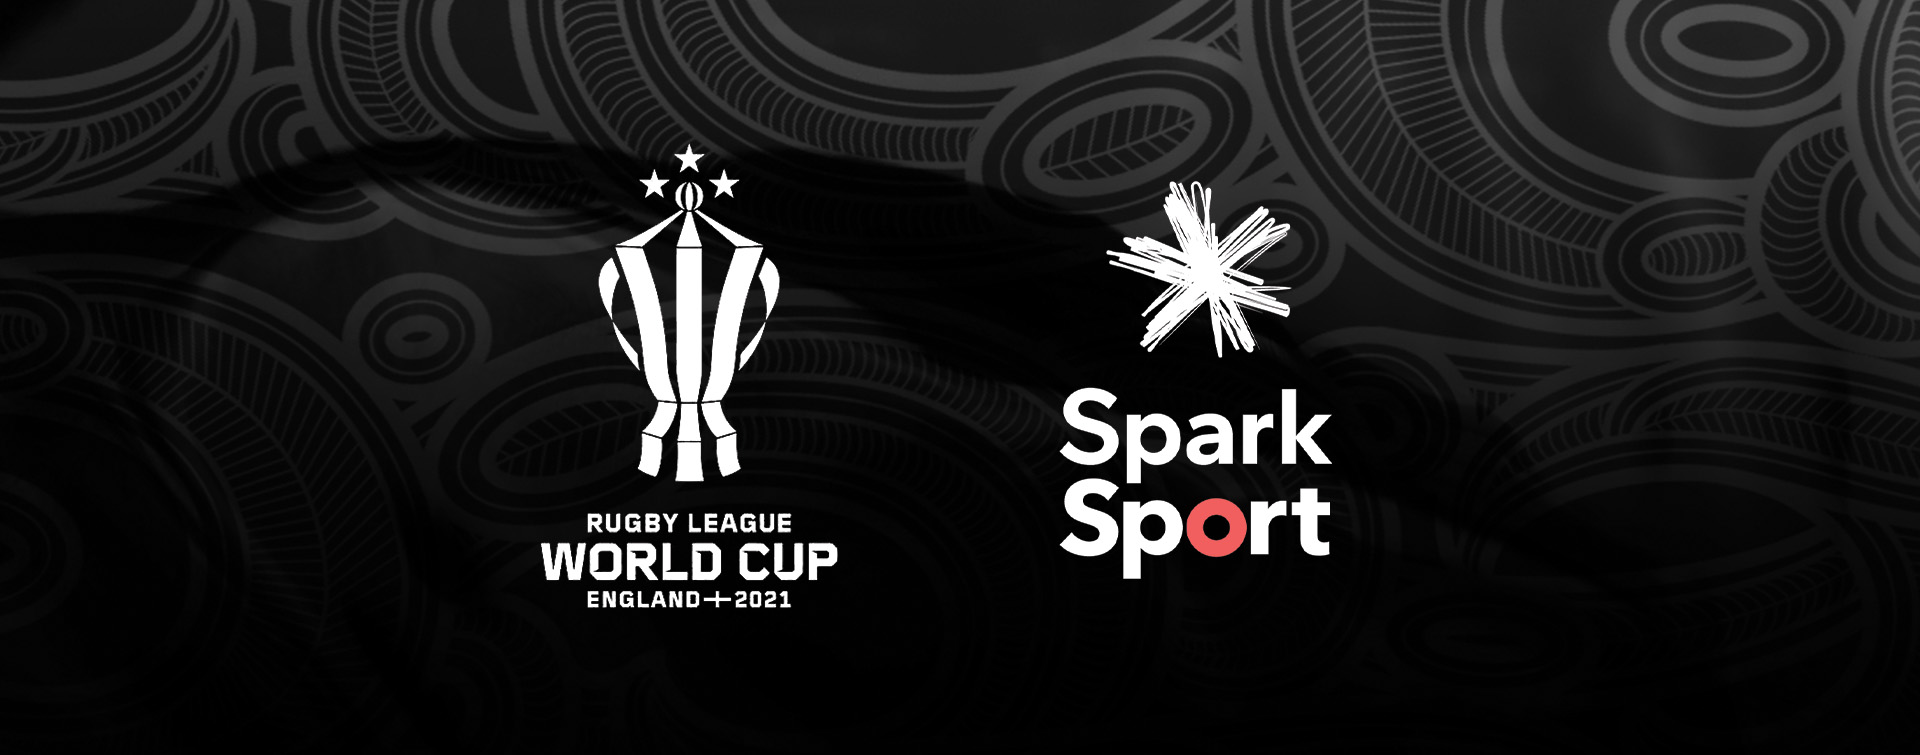 rugby league world cup how to watch